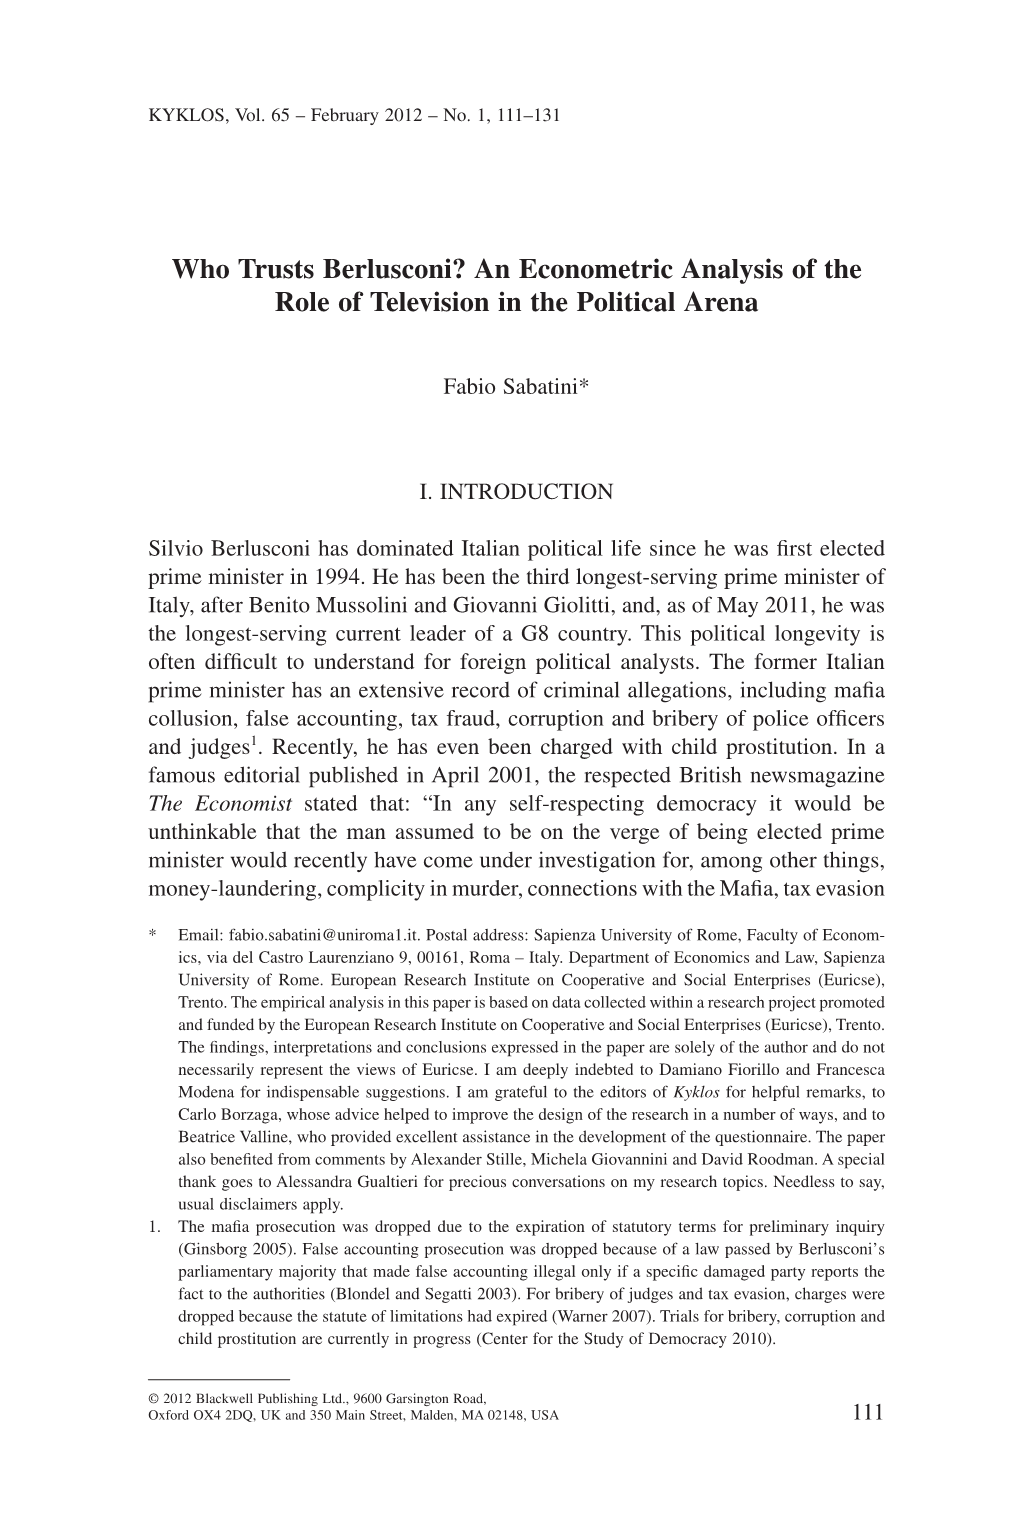 Who Trusts Berlusconi? an Econometric Analysis of the Role of Television in the Political Arena